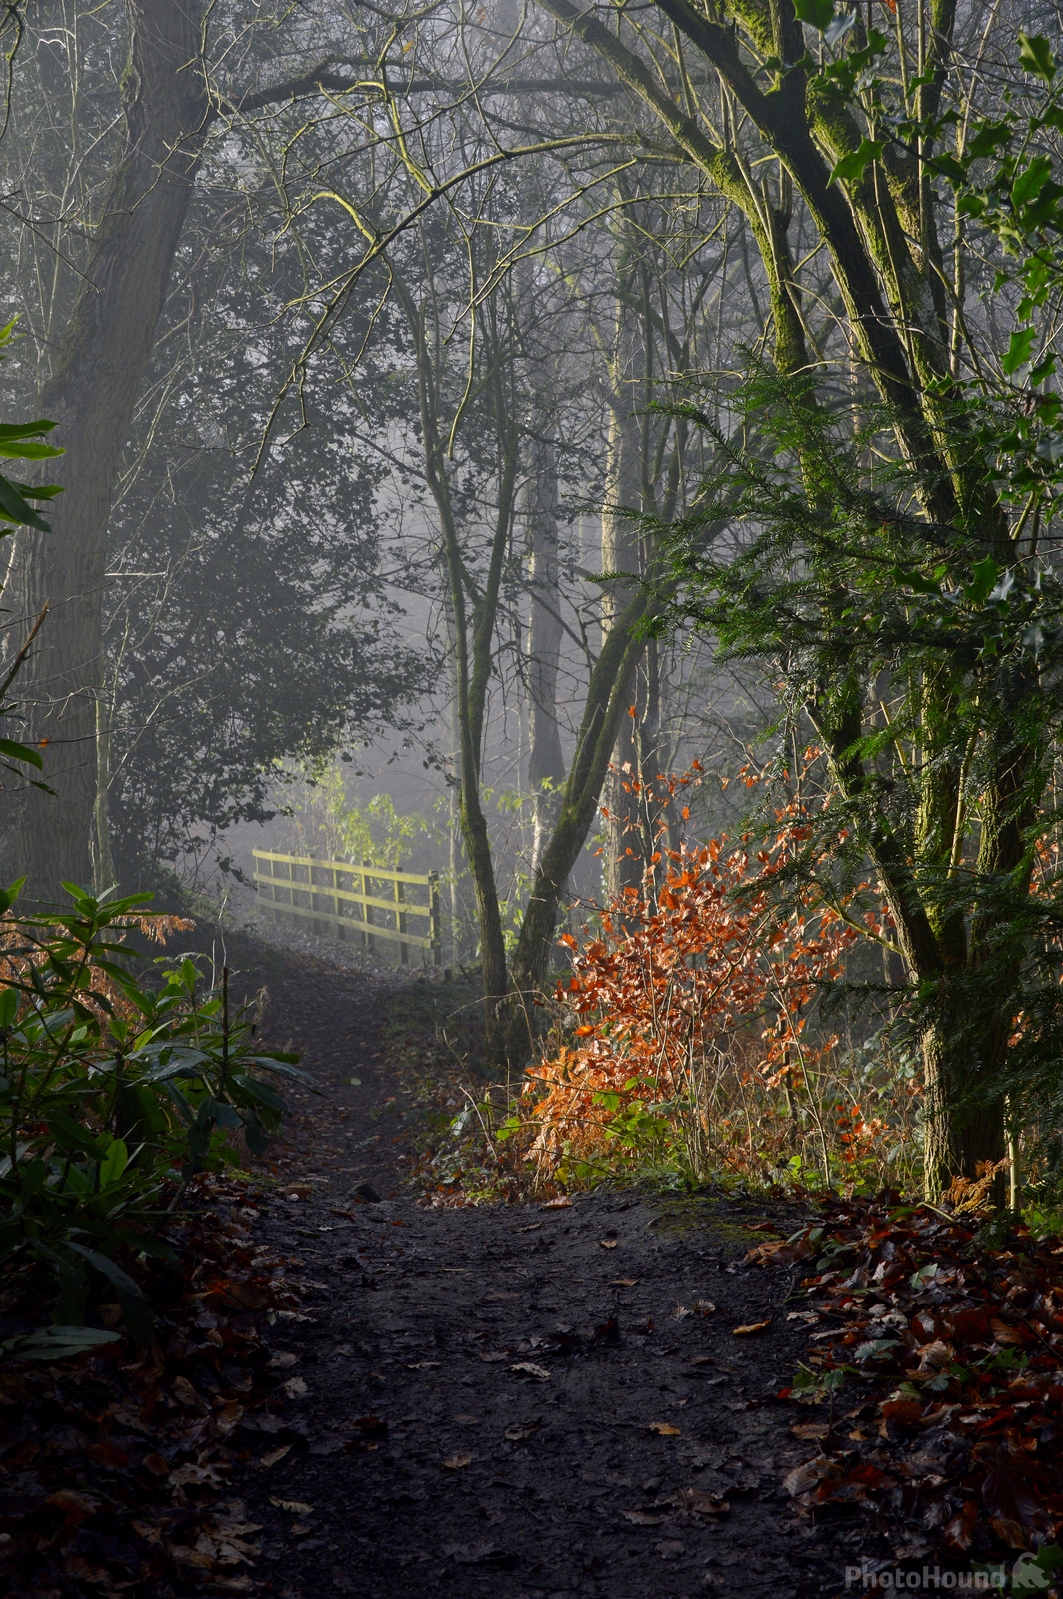 Image of Greenway Bank Country Park by Philip Eptlett